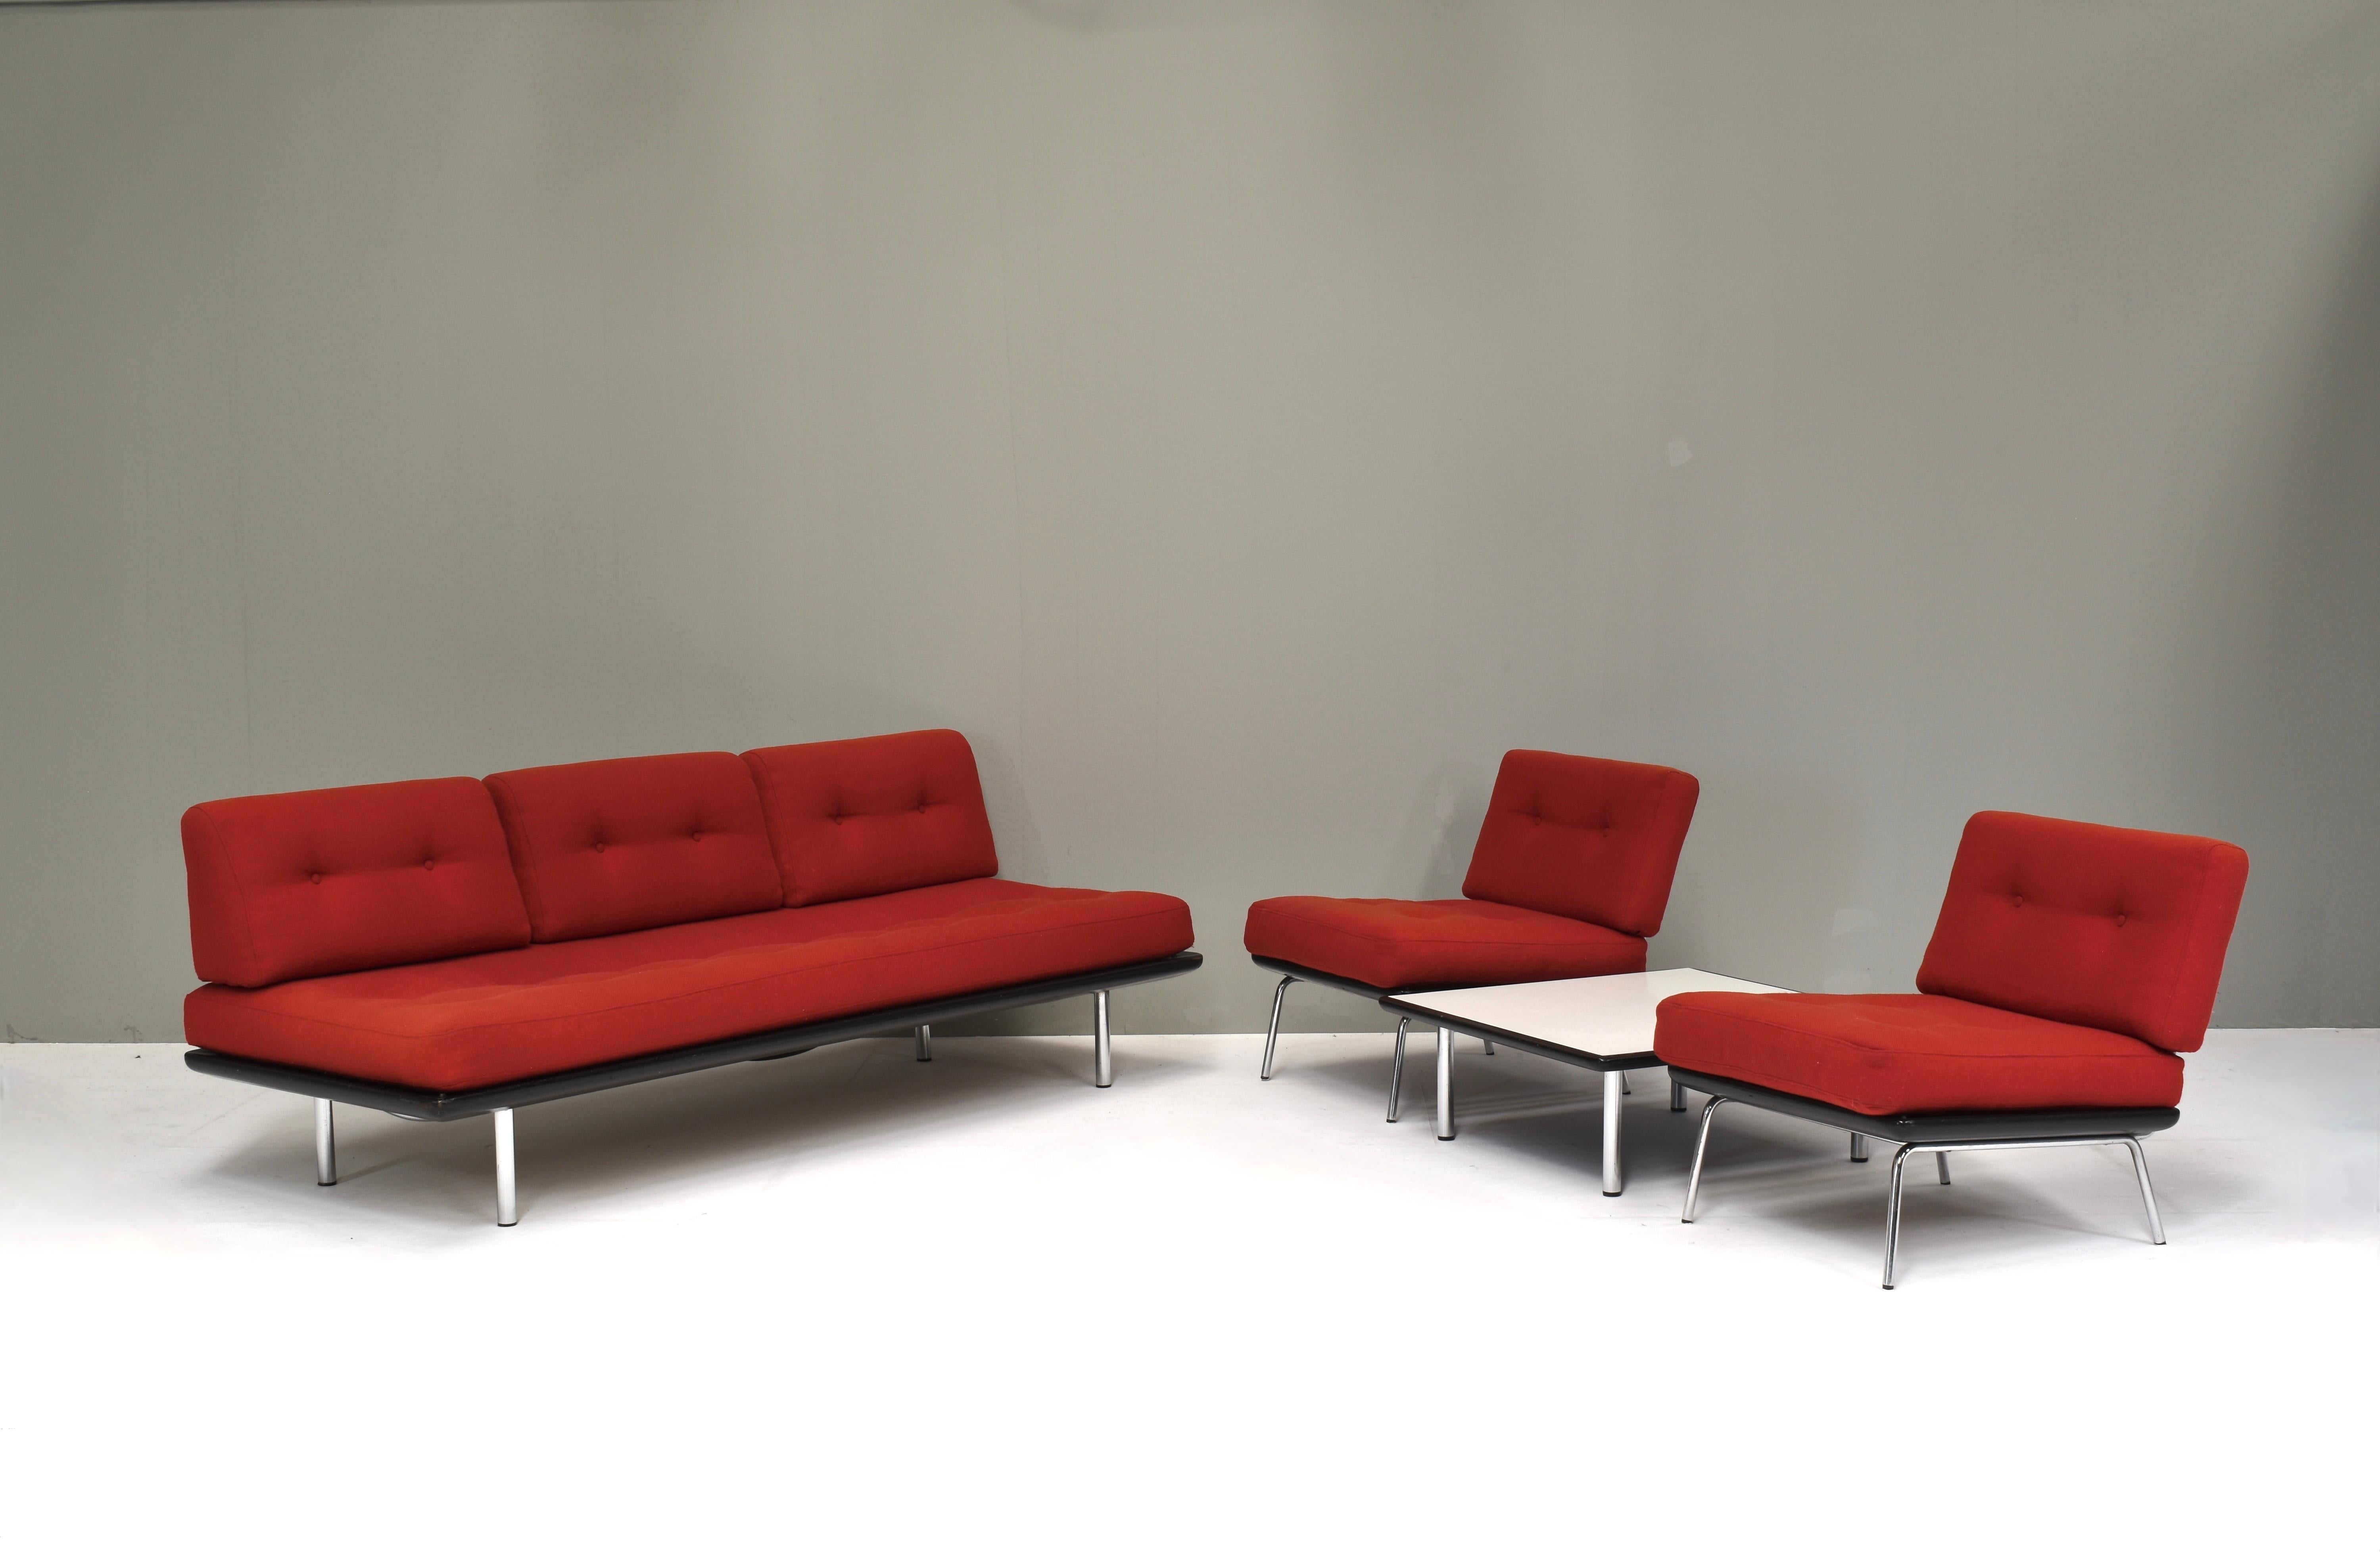 Minimalistic seating set with matching coffee table by or in the style of Martin Visser or Kho Liang Ie.
Sofa and chairs can be sold seperate.
Designer: Unknown. By or in the style of Martin Visser or Kho Liang Ie
Manufacturer: Unknown. By or in